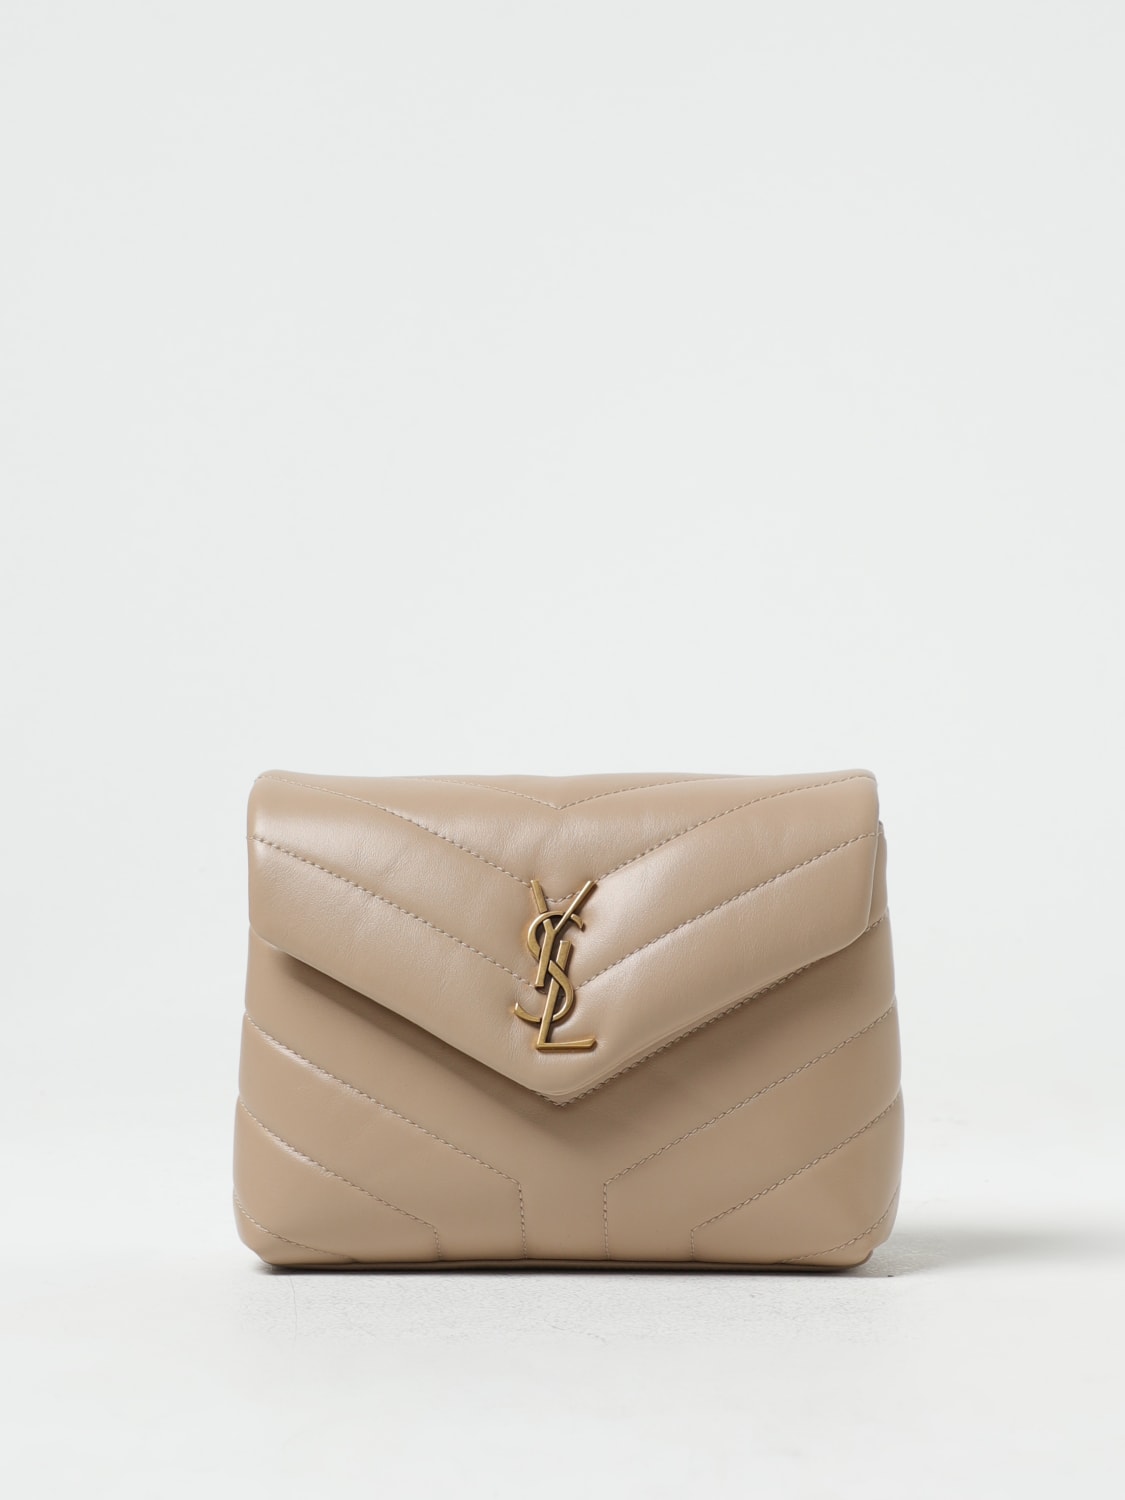 ysl toy loulou beige